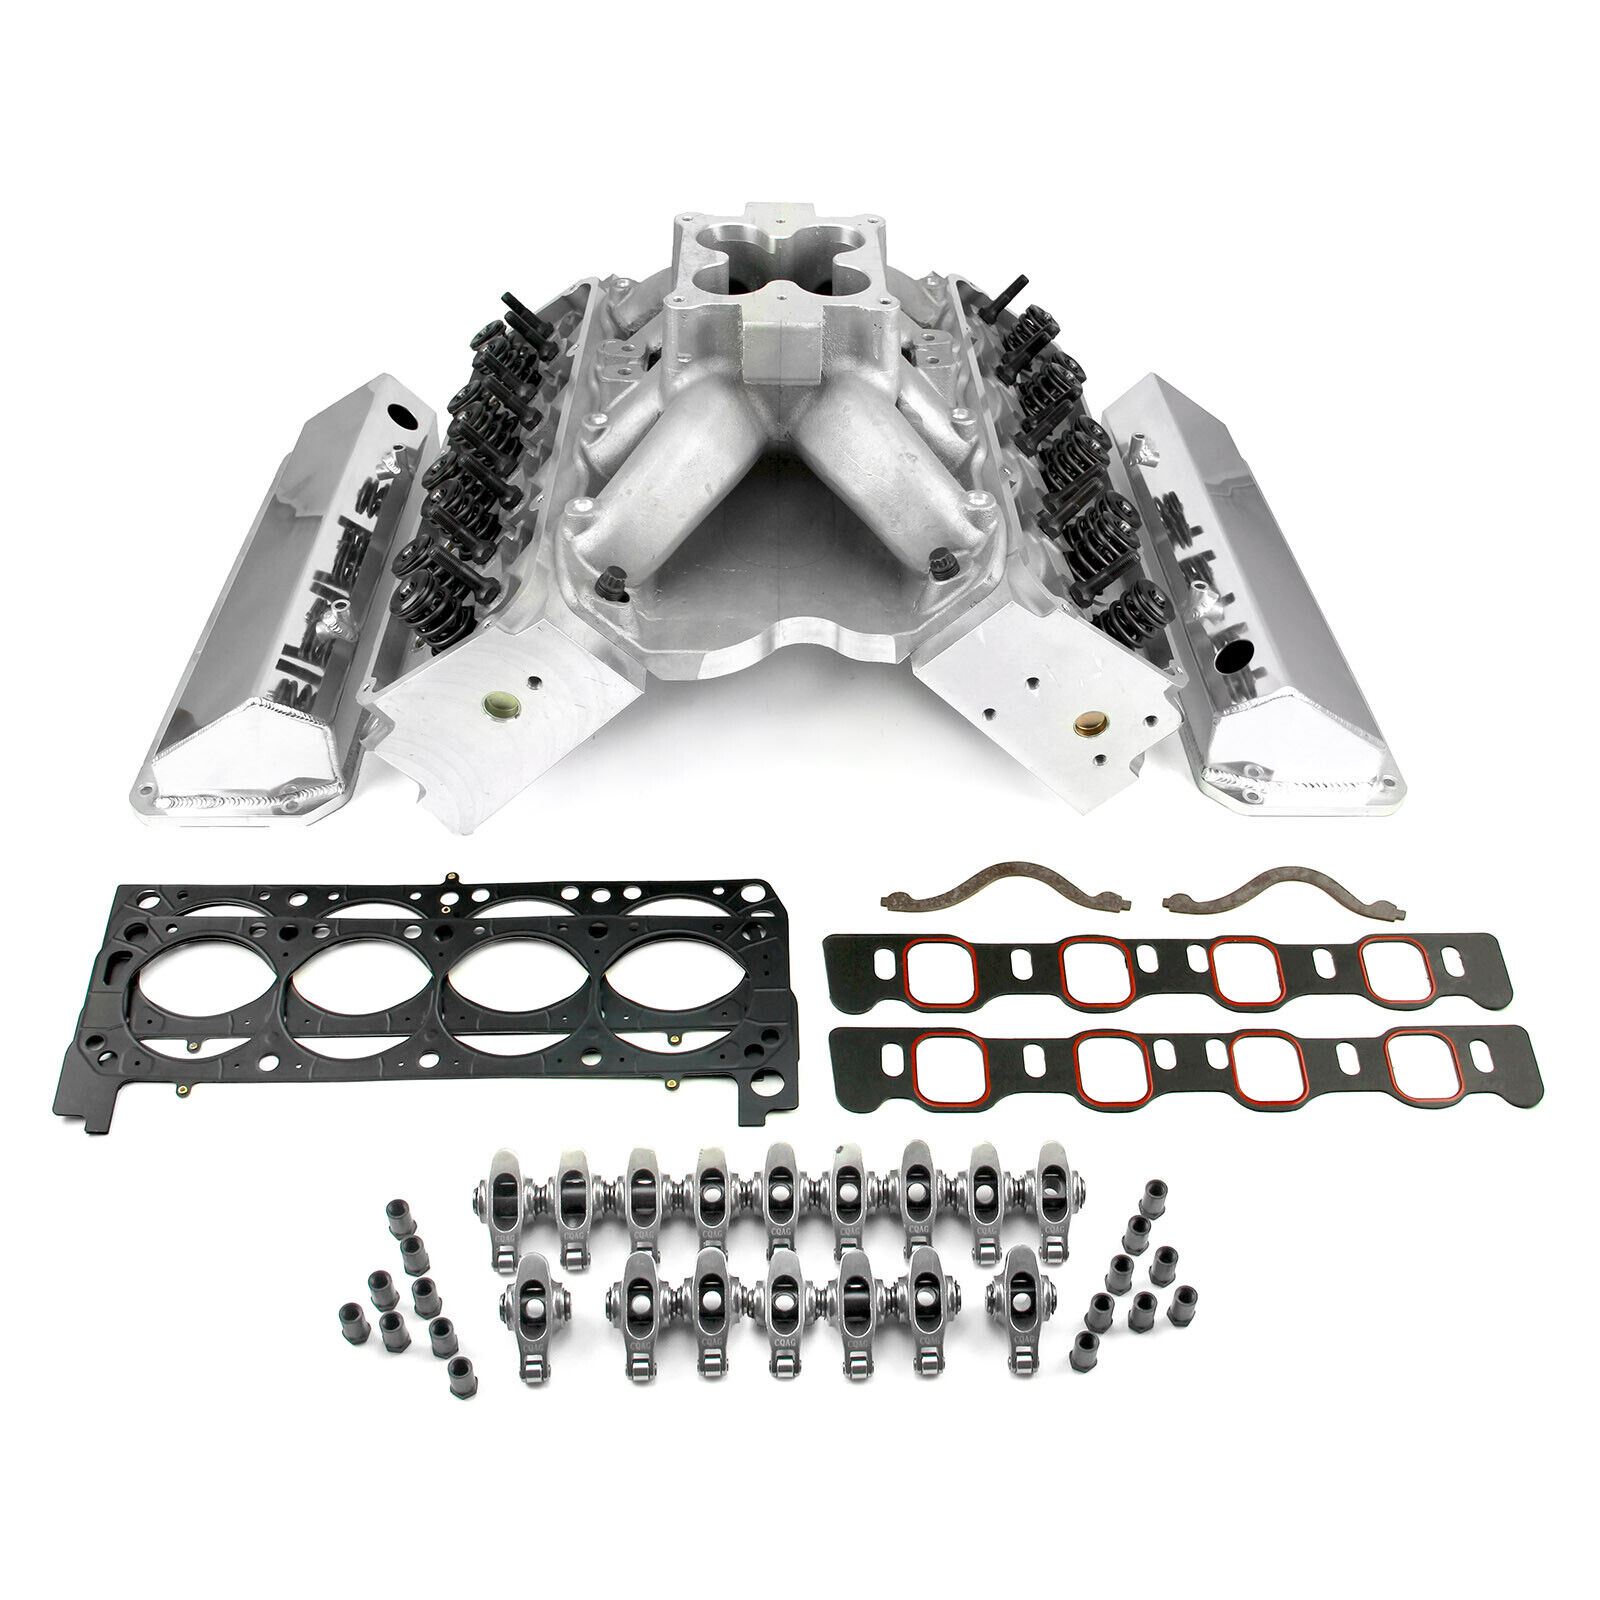 Ford 351W 9.5 Deck Fusion Manifold Hyd FT Cylinder Head Top End Engine Combo Kit